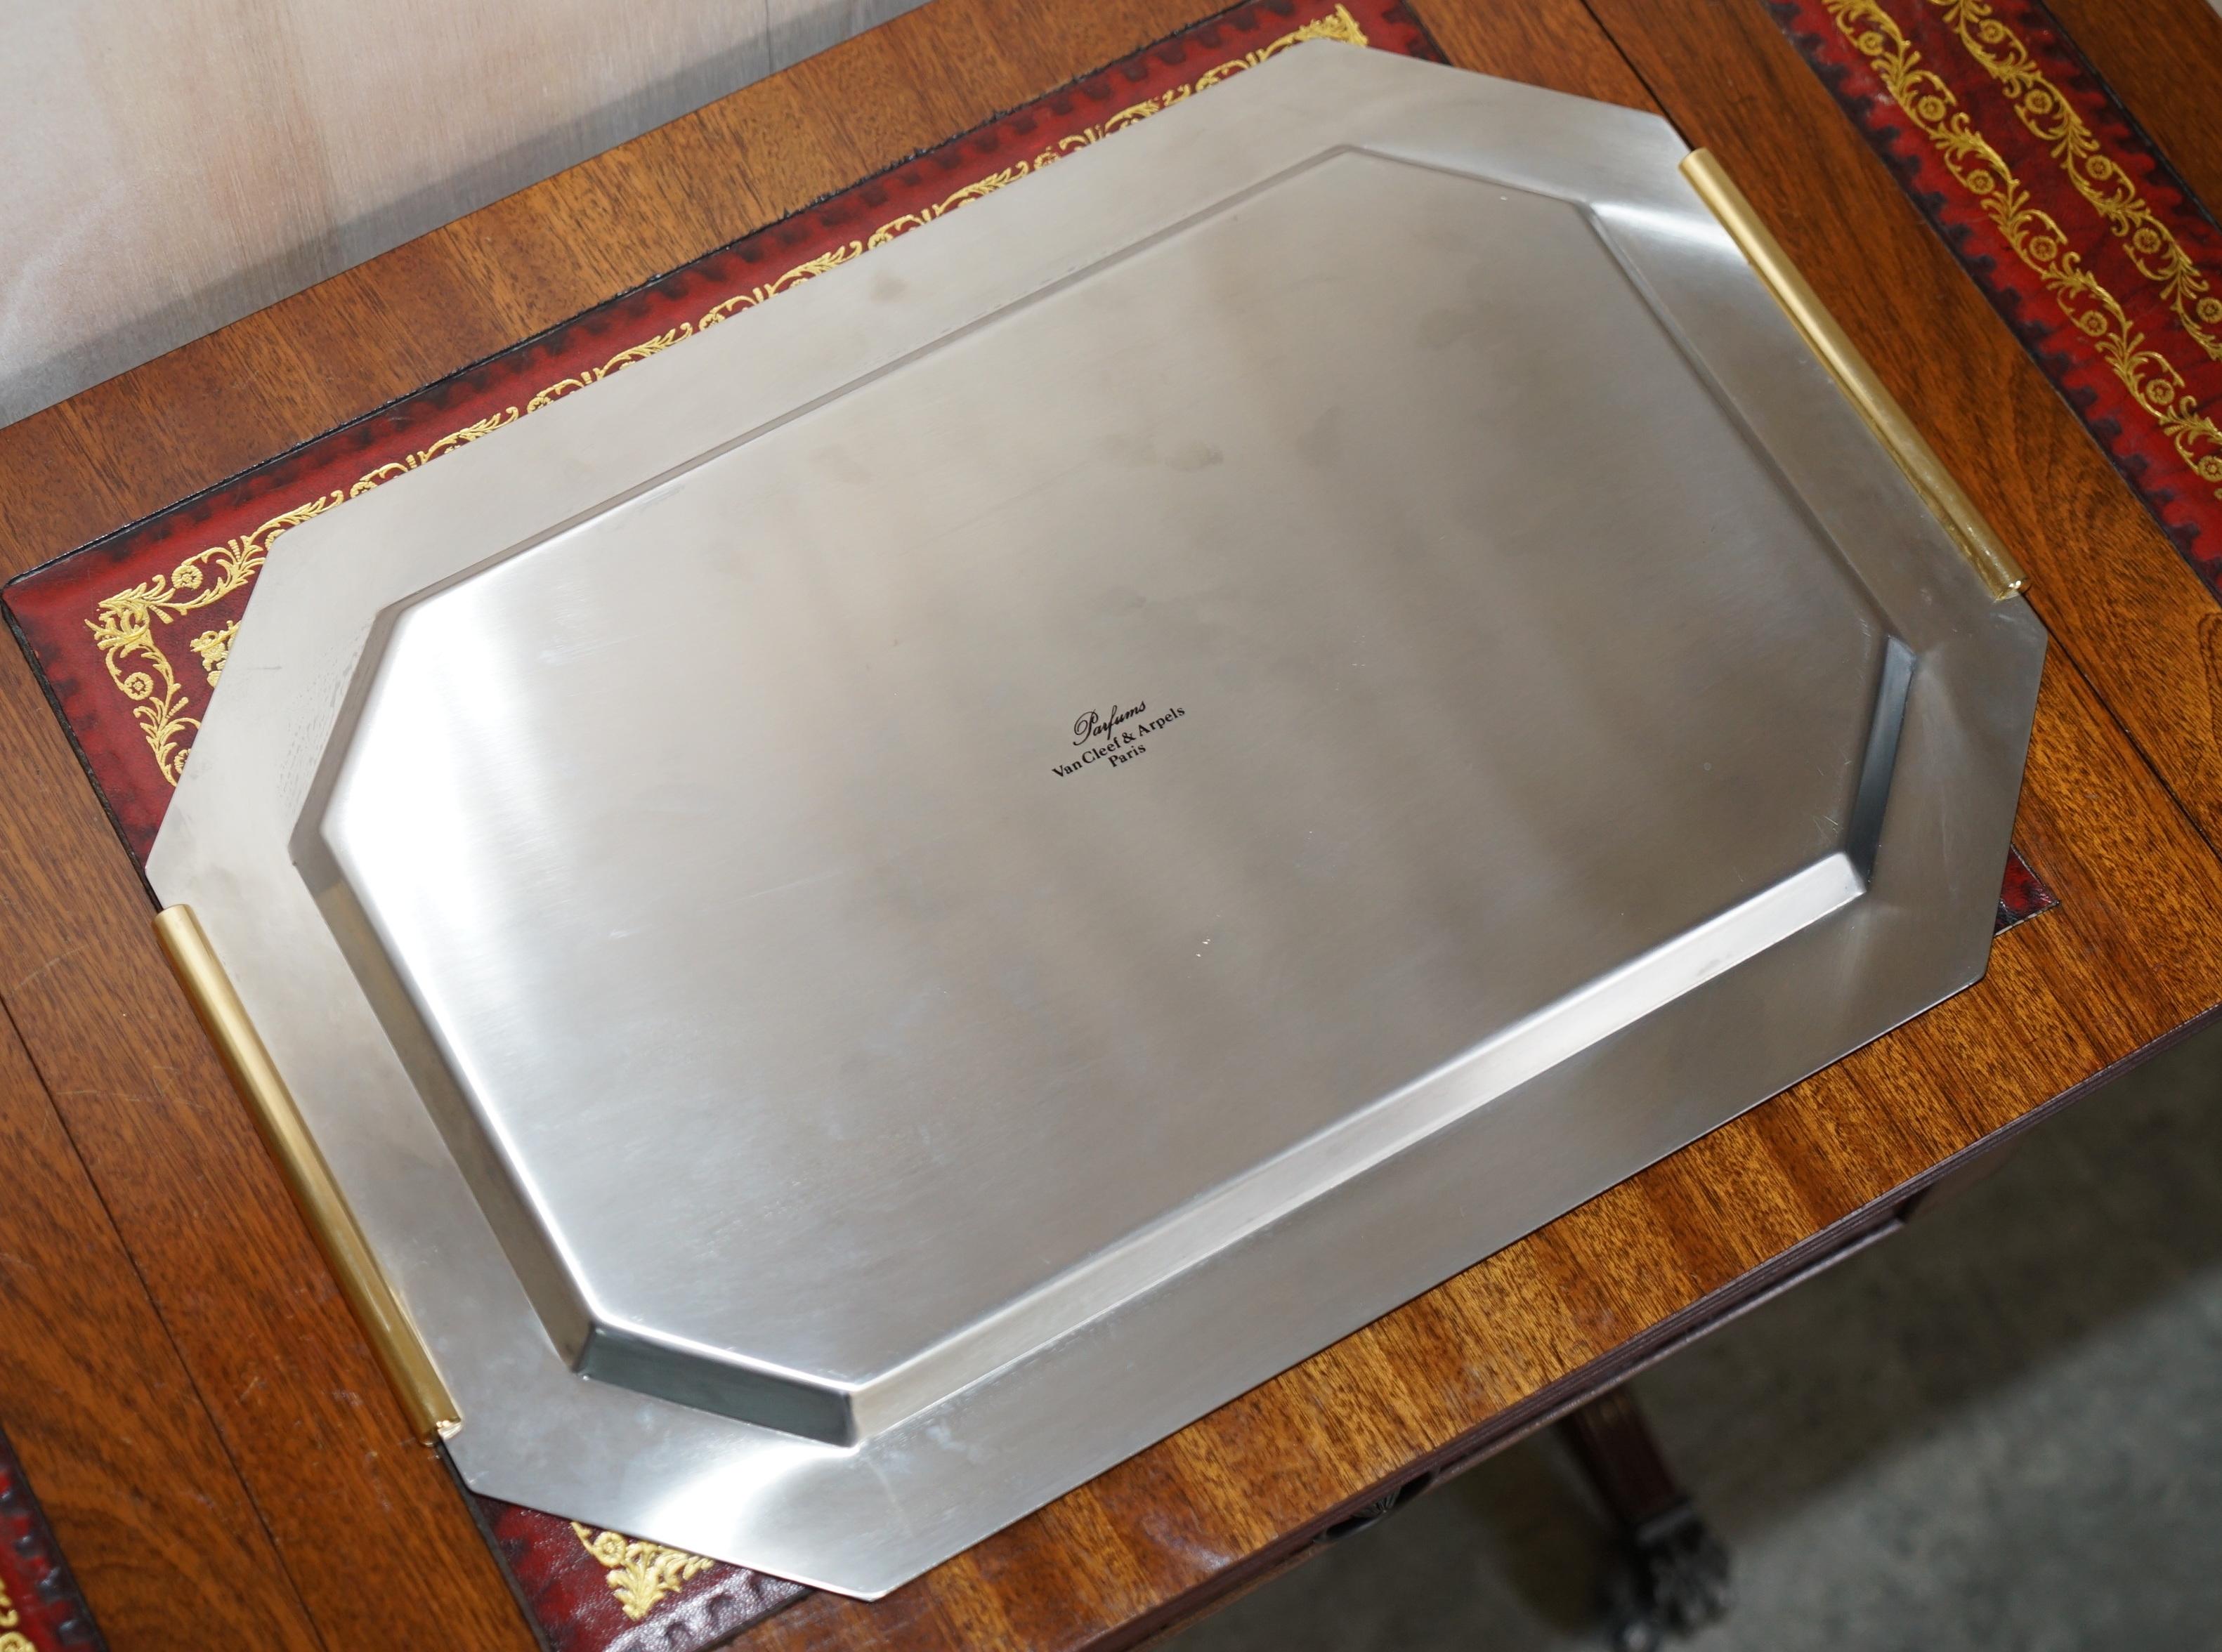 English Luxury Van Cleef & Arpels Paris Chrome Serving Tray with Gold Gilt Handles For Sale